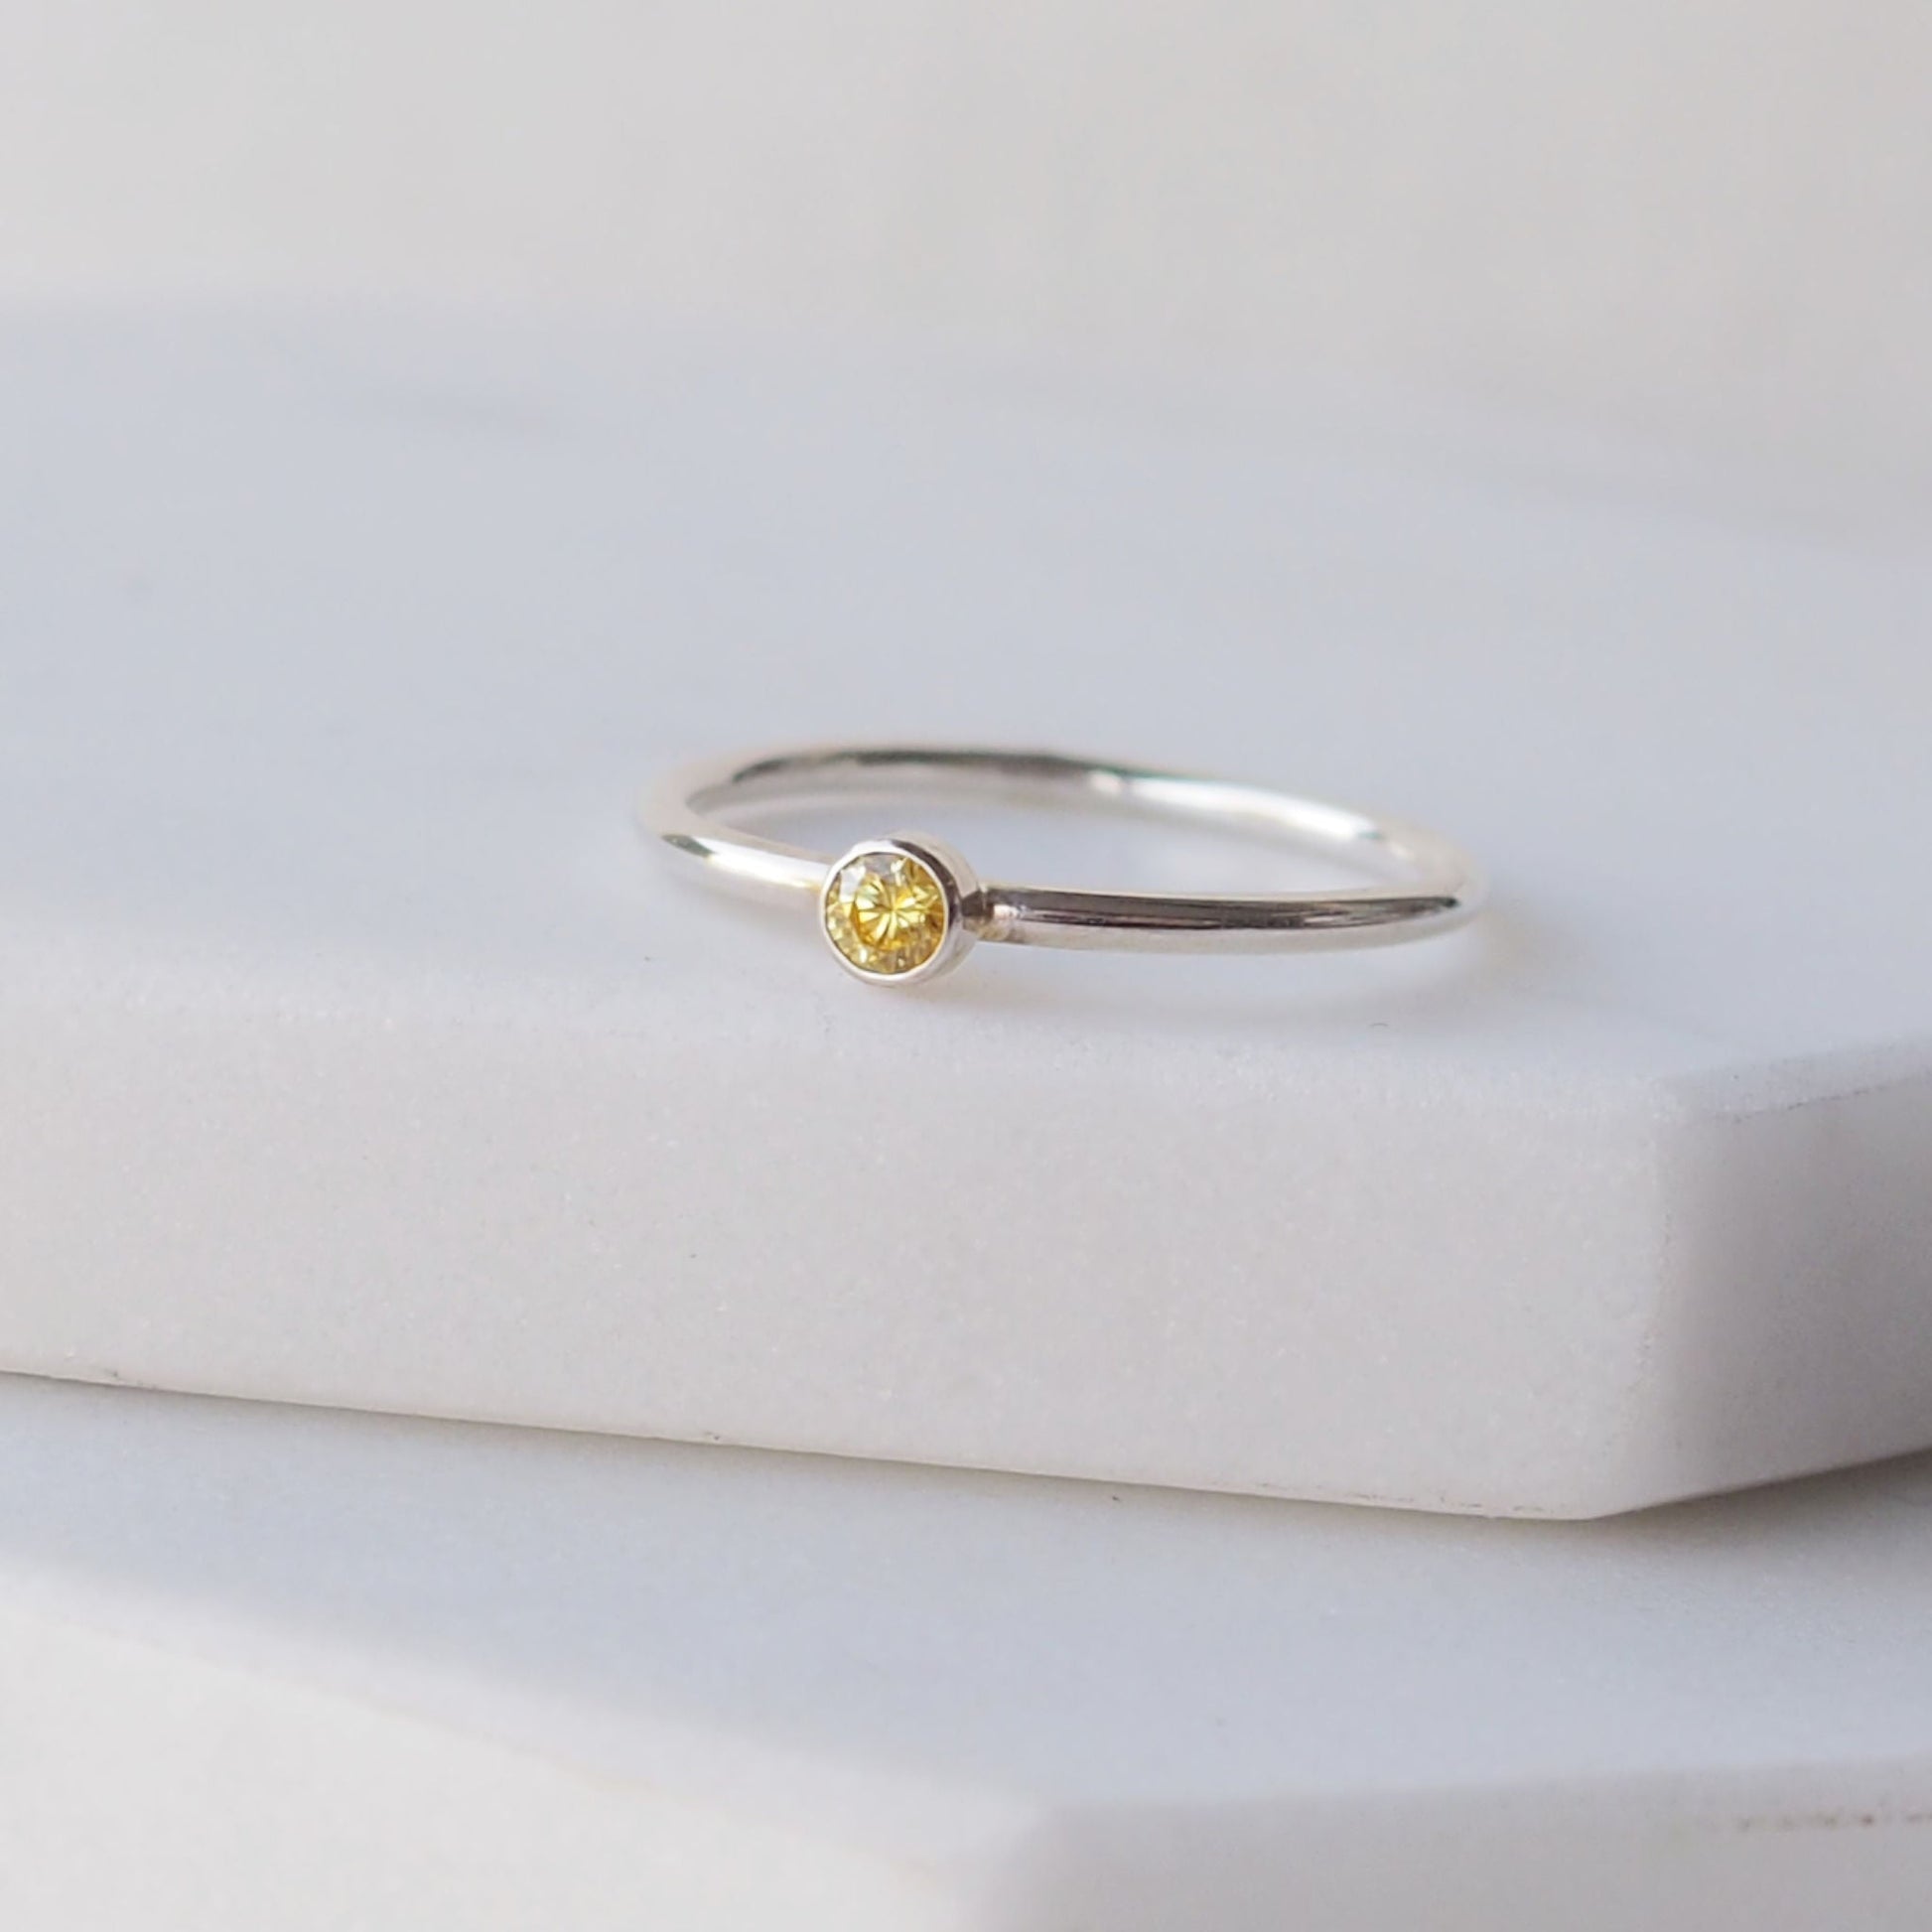 Citrine facet cut ring with a small gemstone set onto a round wire band in Sterling Silver. Handmade by maram jewellery in Scotland UK